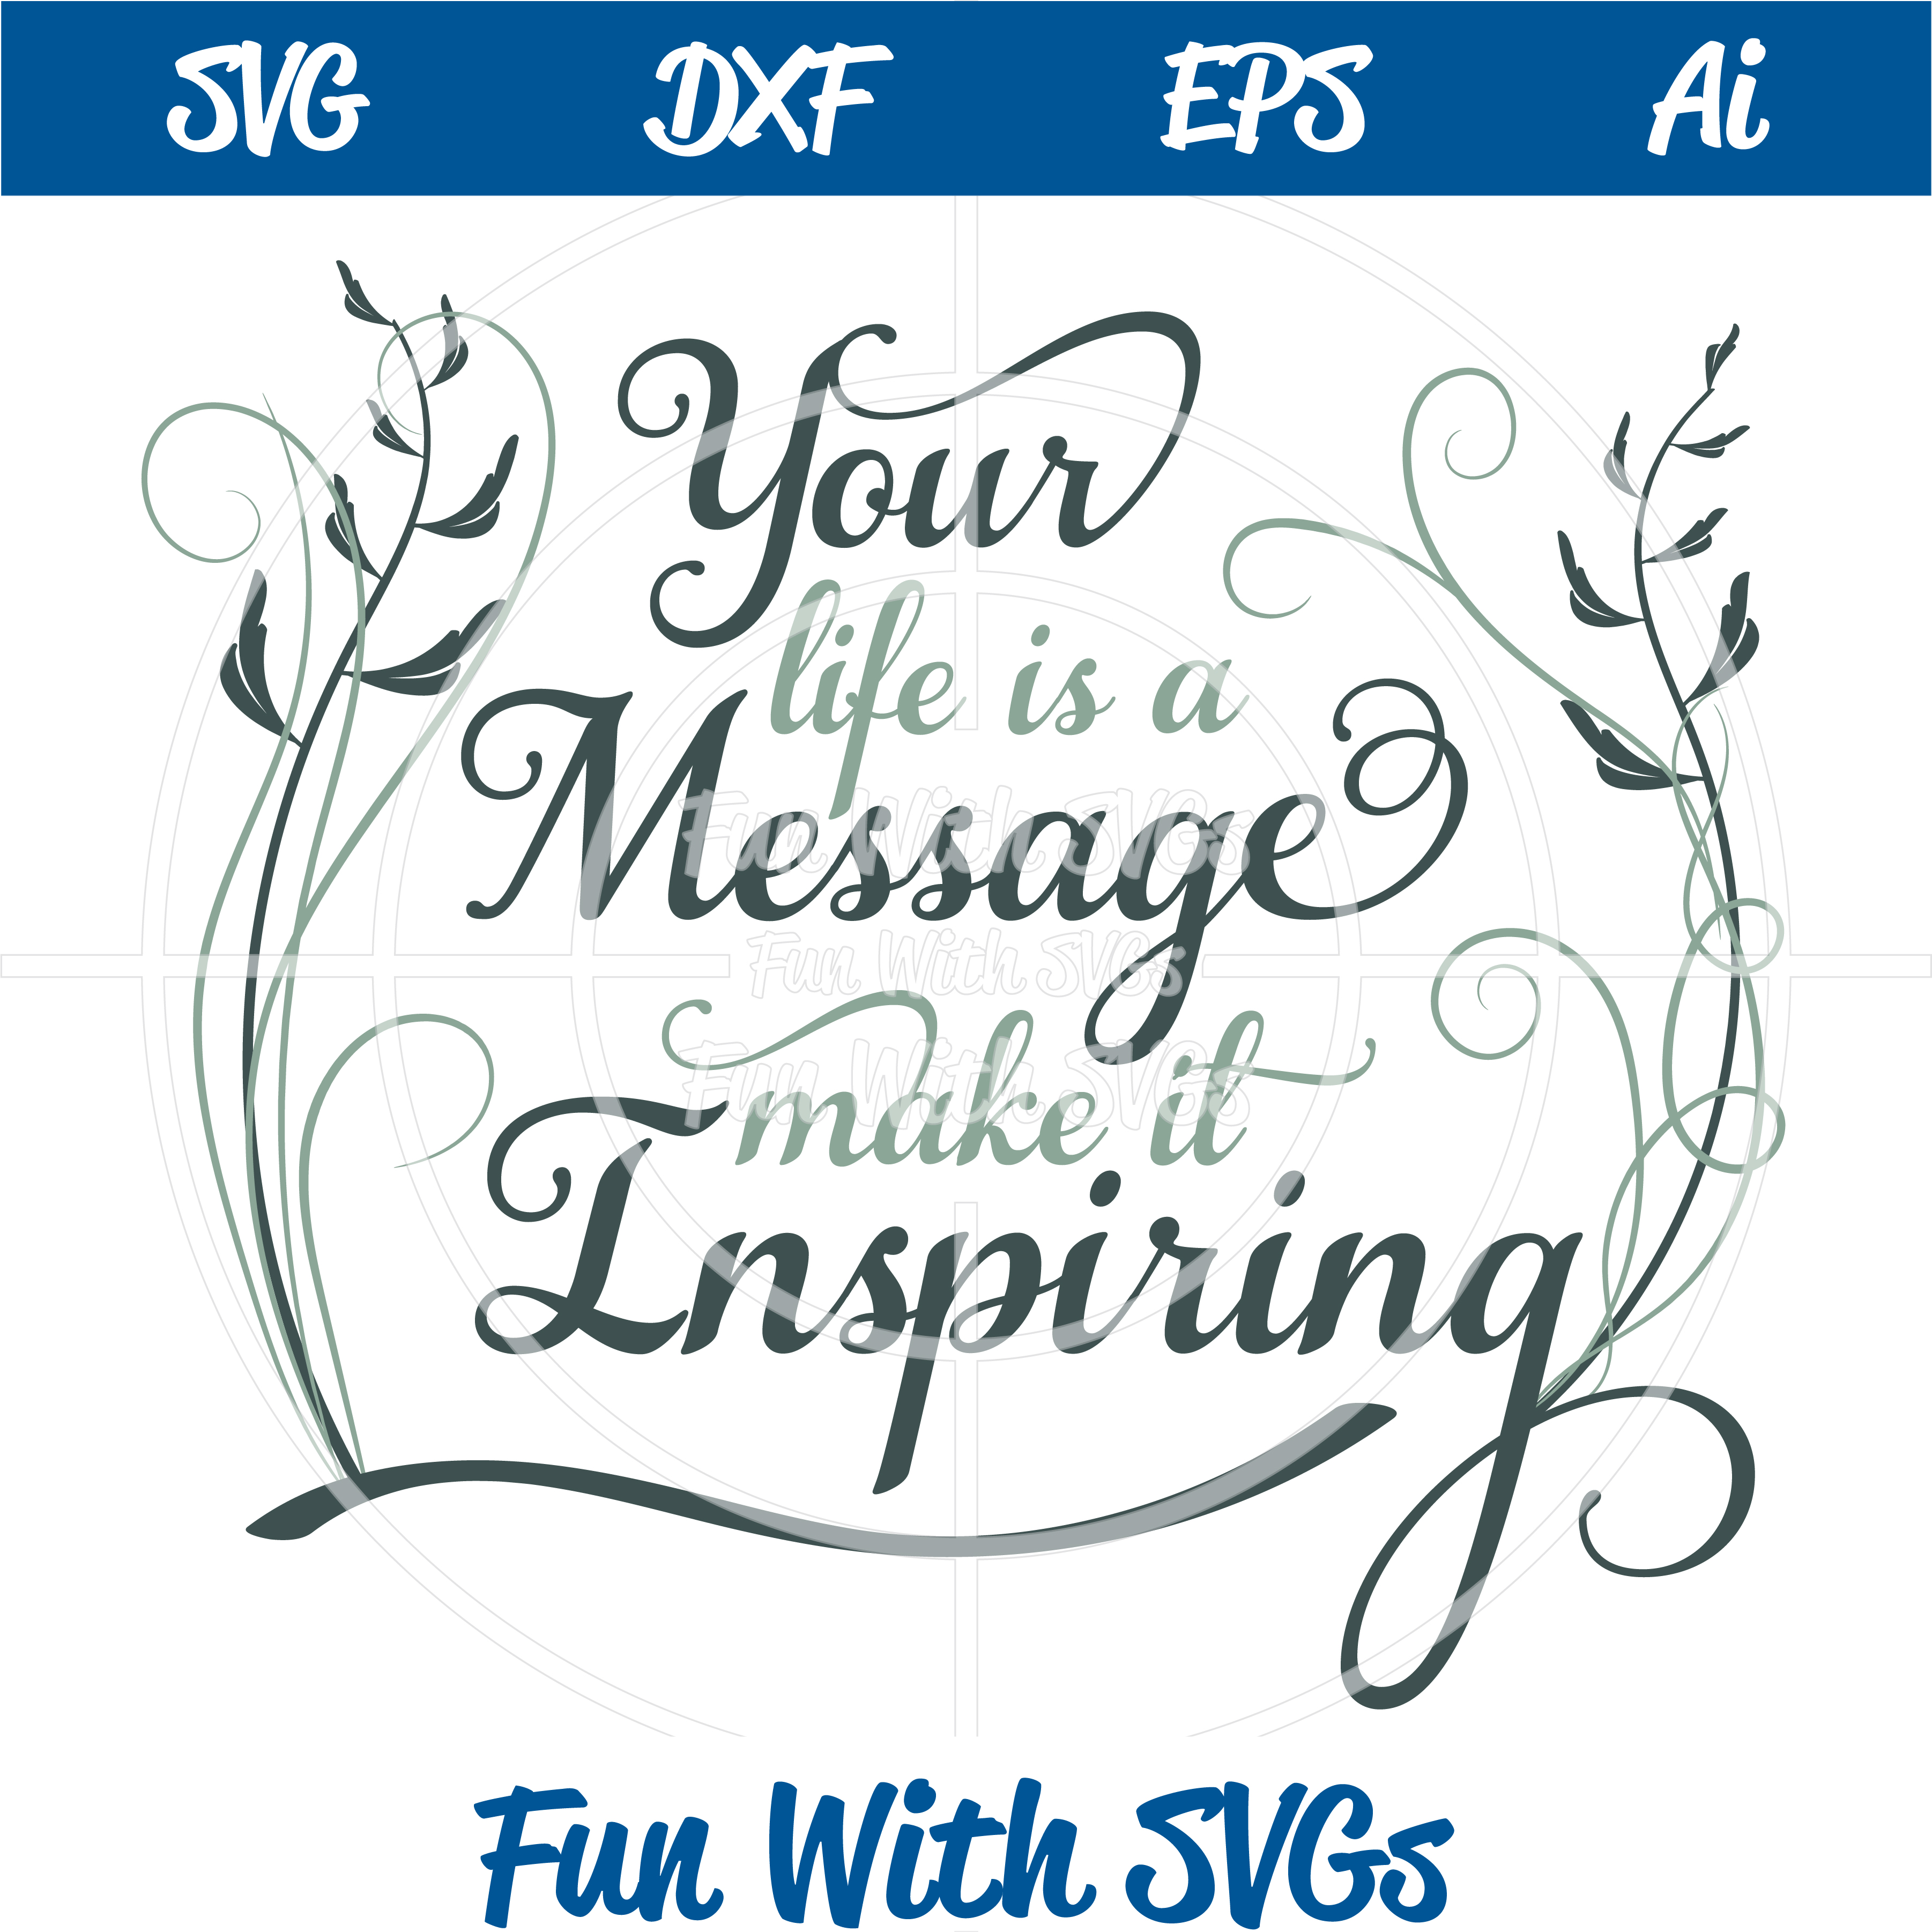 Download Inspirational Life Message SVG Cut File ~ Fun With SVGs